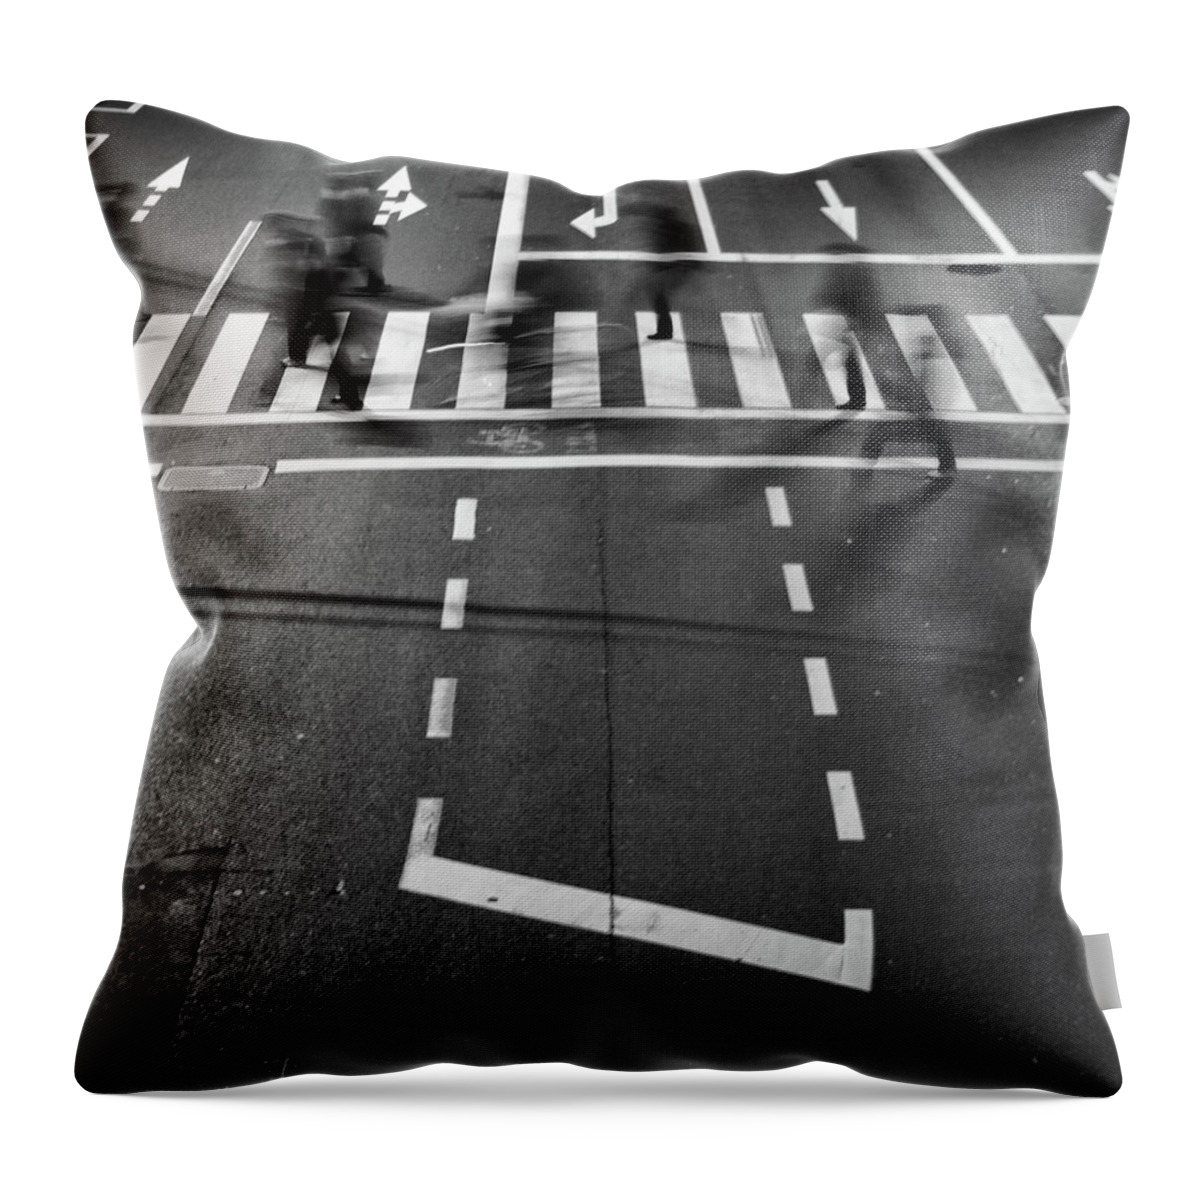 Corporate Business Throw Pillow featuring the photograph Businessmen Crossing Street by Chris Jongkind